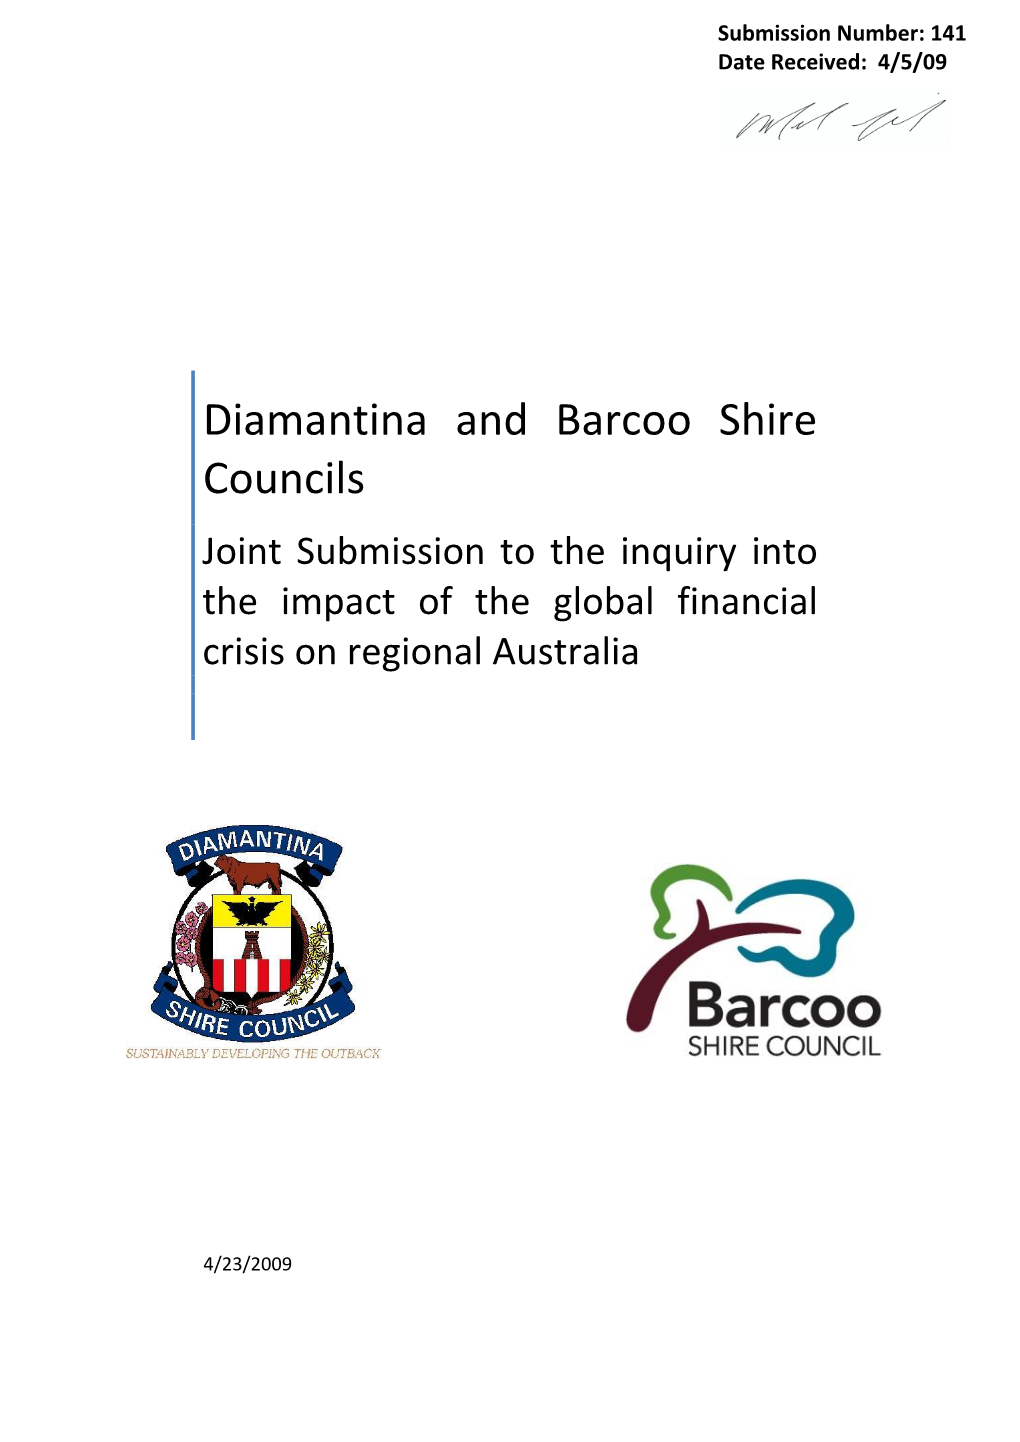 Diamantina and Barcoo Shire Councils Joint Submission to the Inquiry Into the Impact of the Global Financial Crisis on Regional Australia